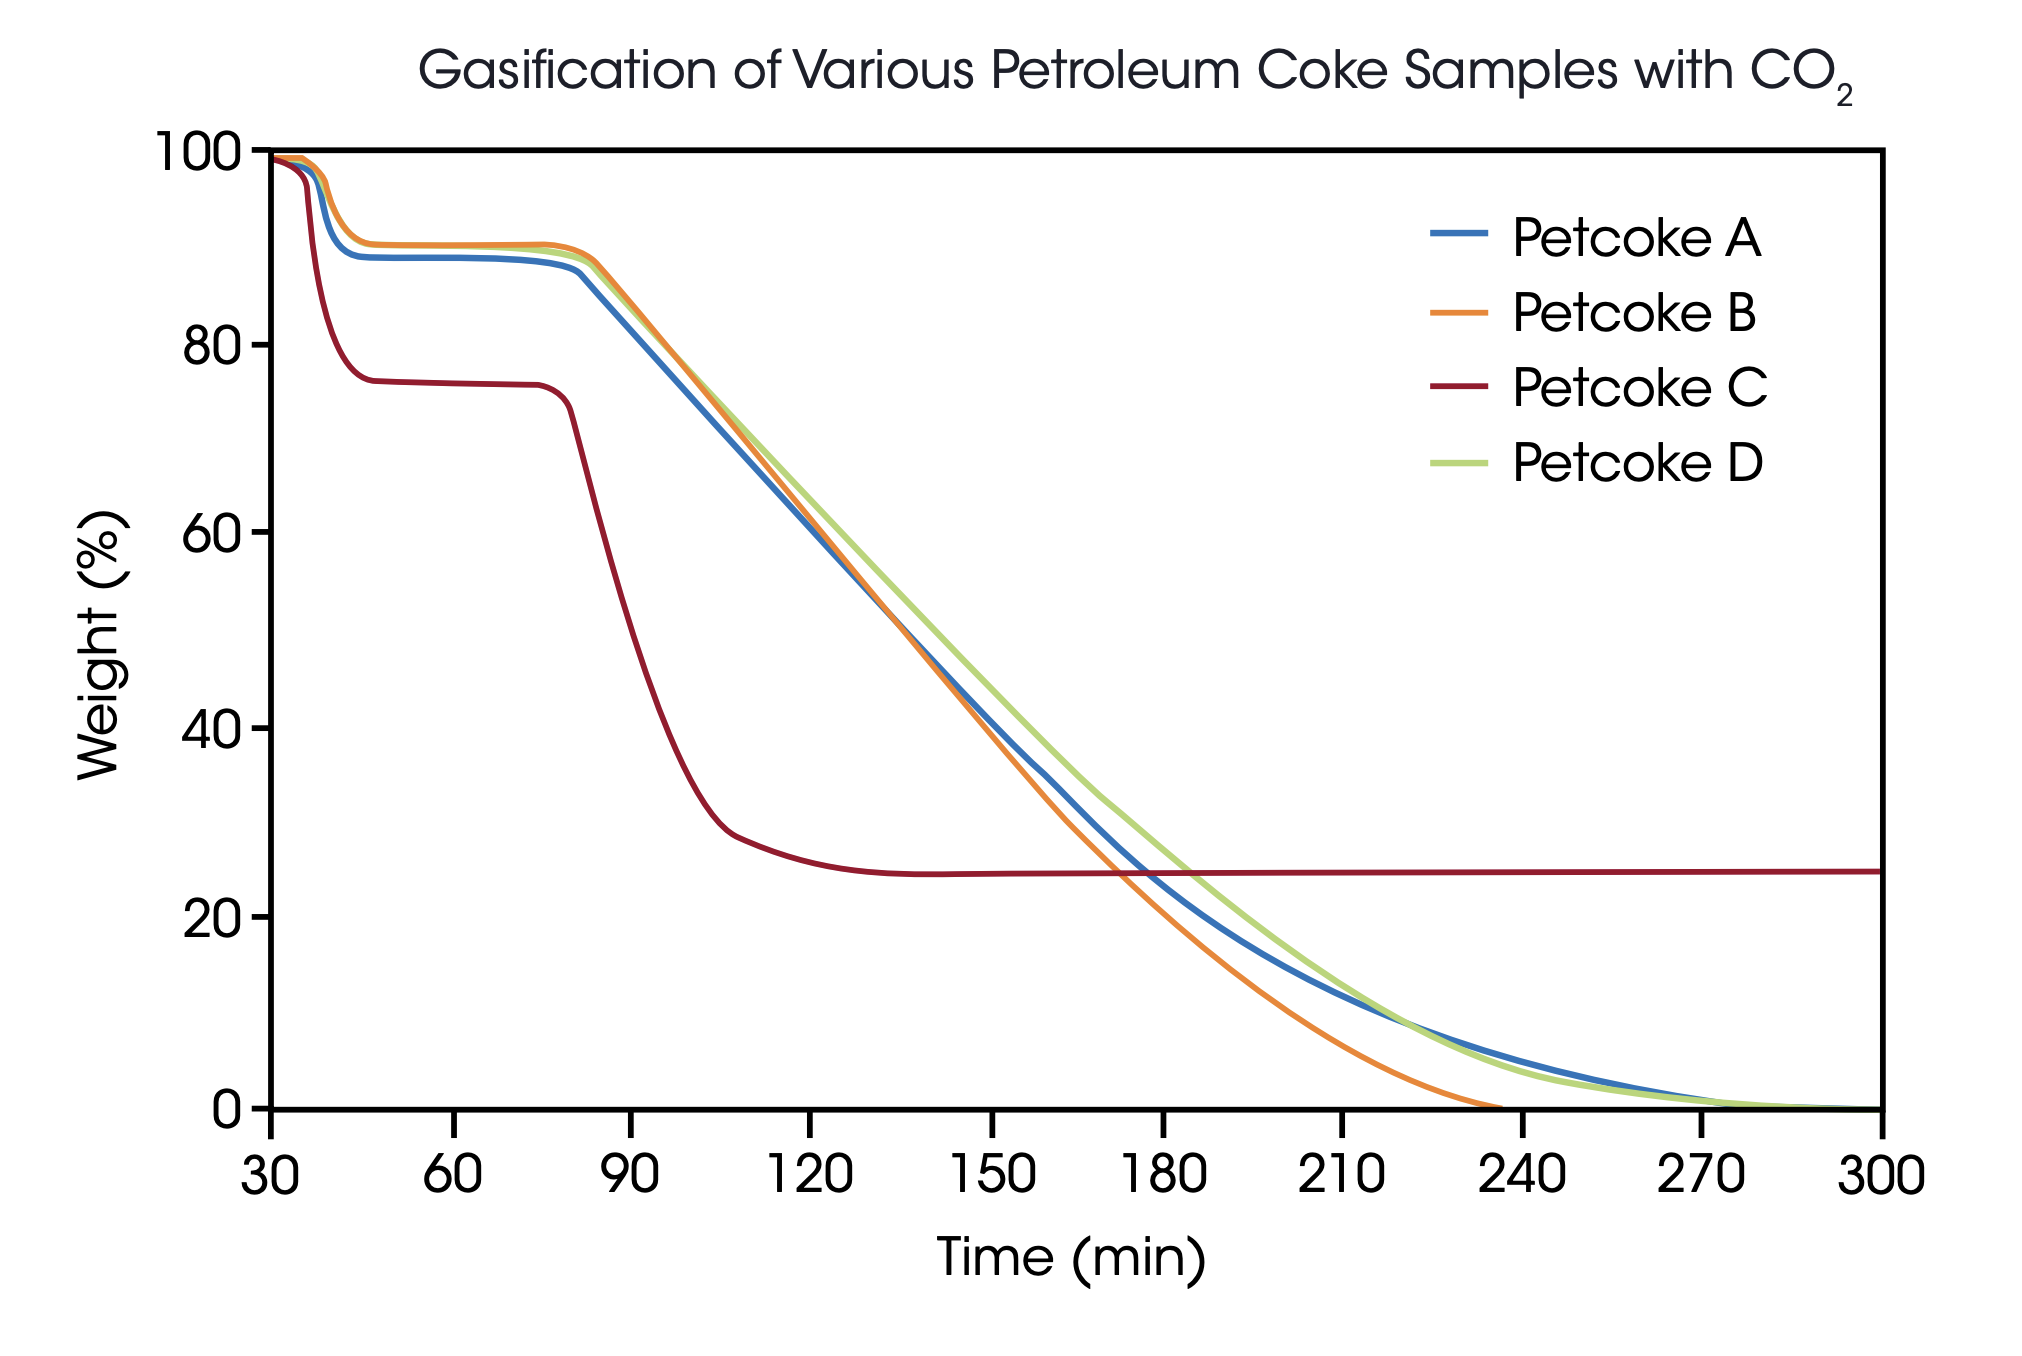 Figure 6. Four petroleum coke samples were gasified at 40 bar and 1100 °C with 30% CO2 in Argon. Following a 100 K/min temperature ramp and a 30 min isothermal step in Argon, the samples were exposed to CO2 for 240 min.